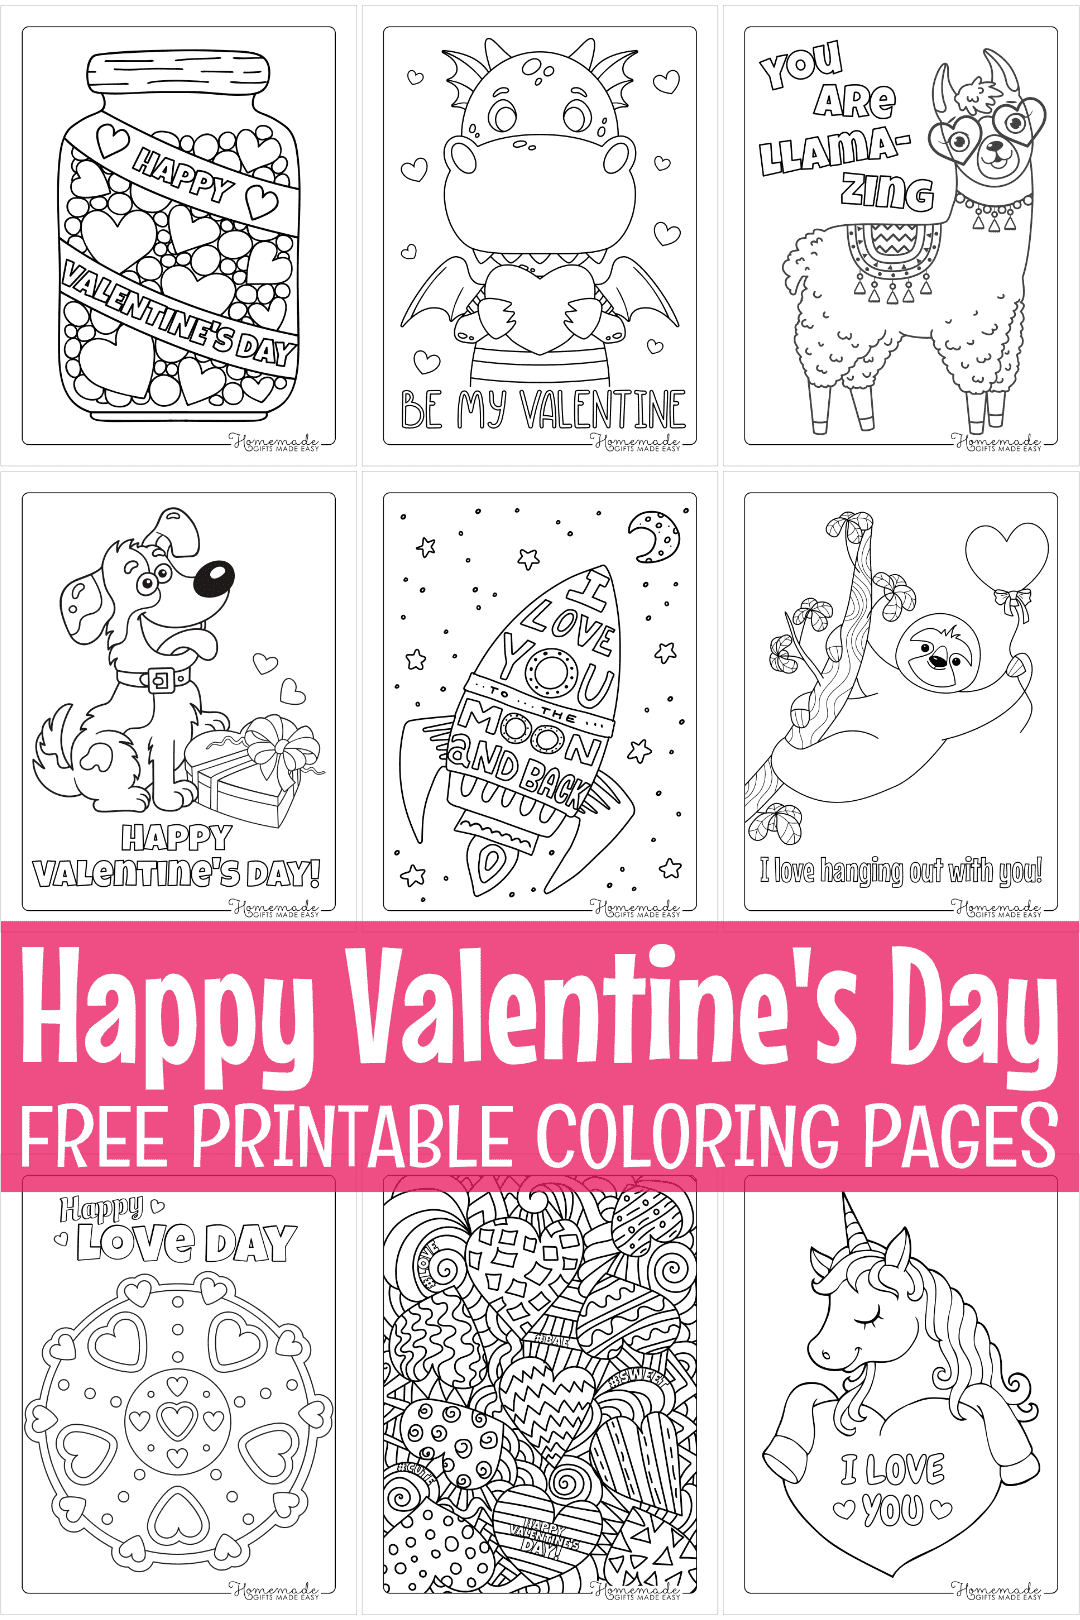 20 Free Printable Valentine's Day Coloring Pages